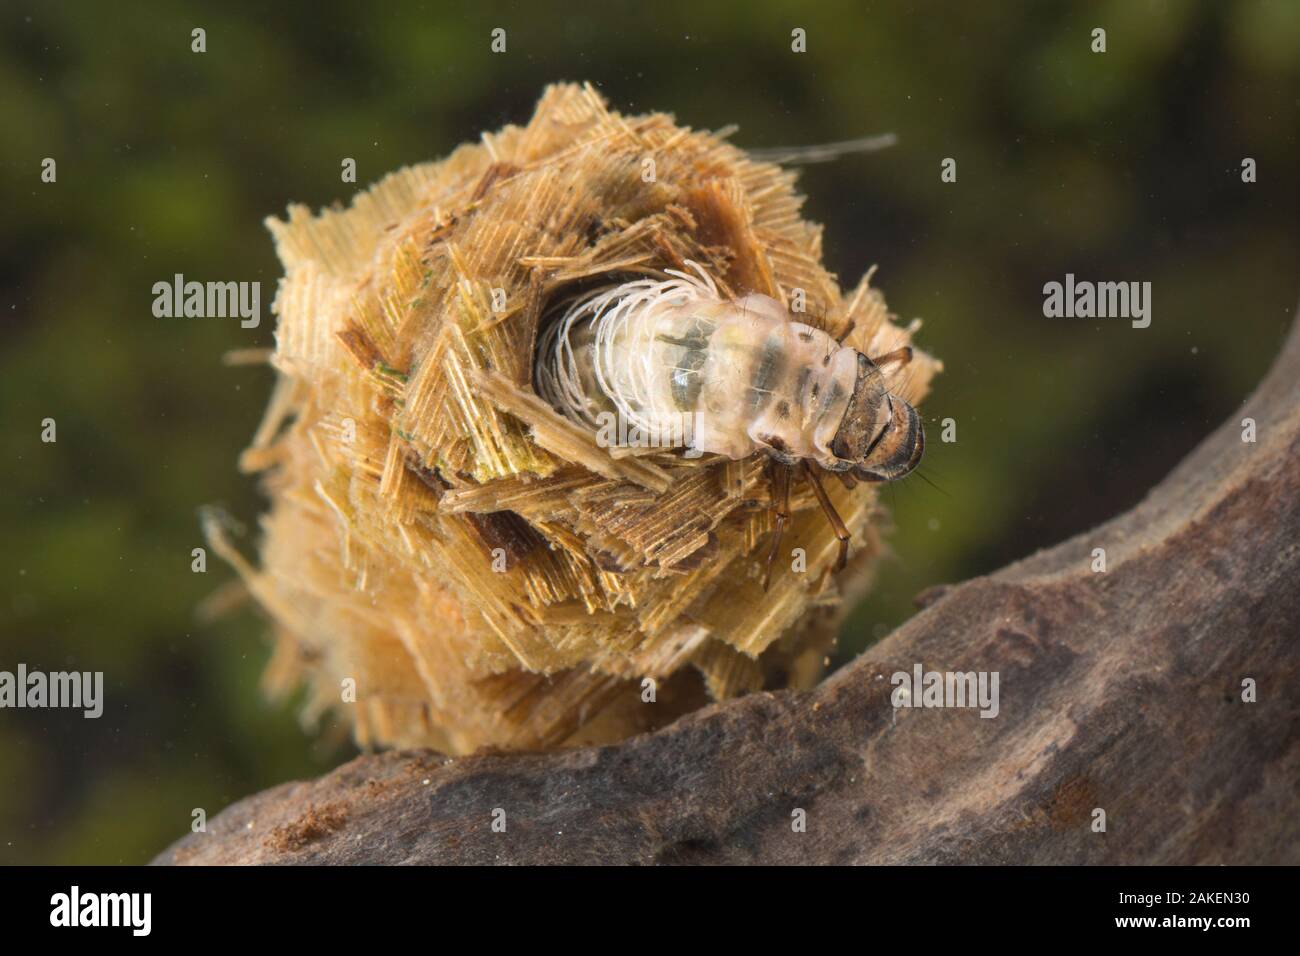 Case-building caddisfly larva (Limnephilus rhombicus), Europe, June, controlled conditions Stock Photo